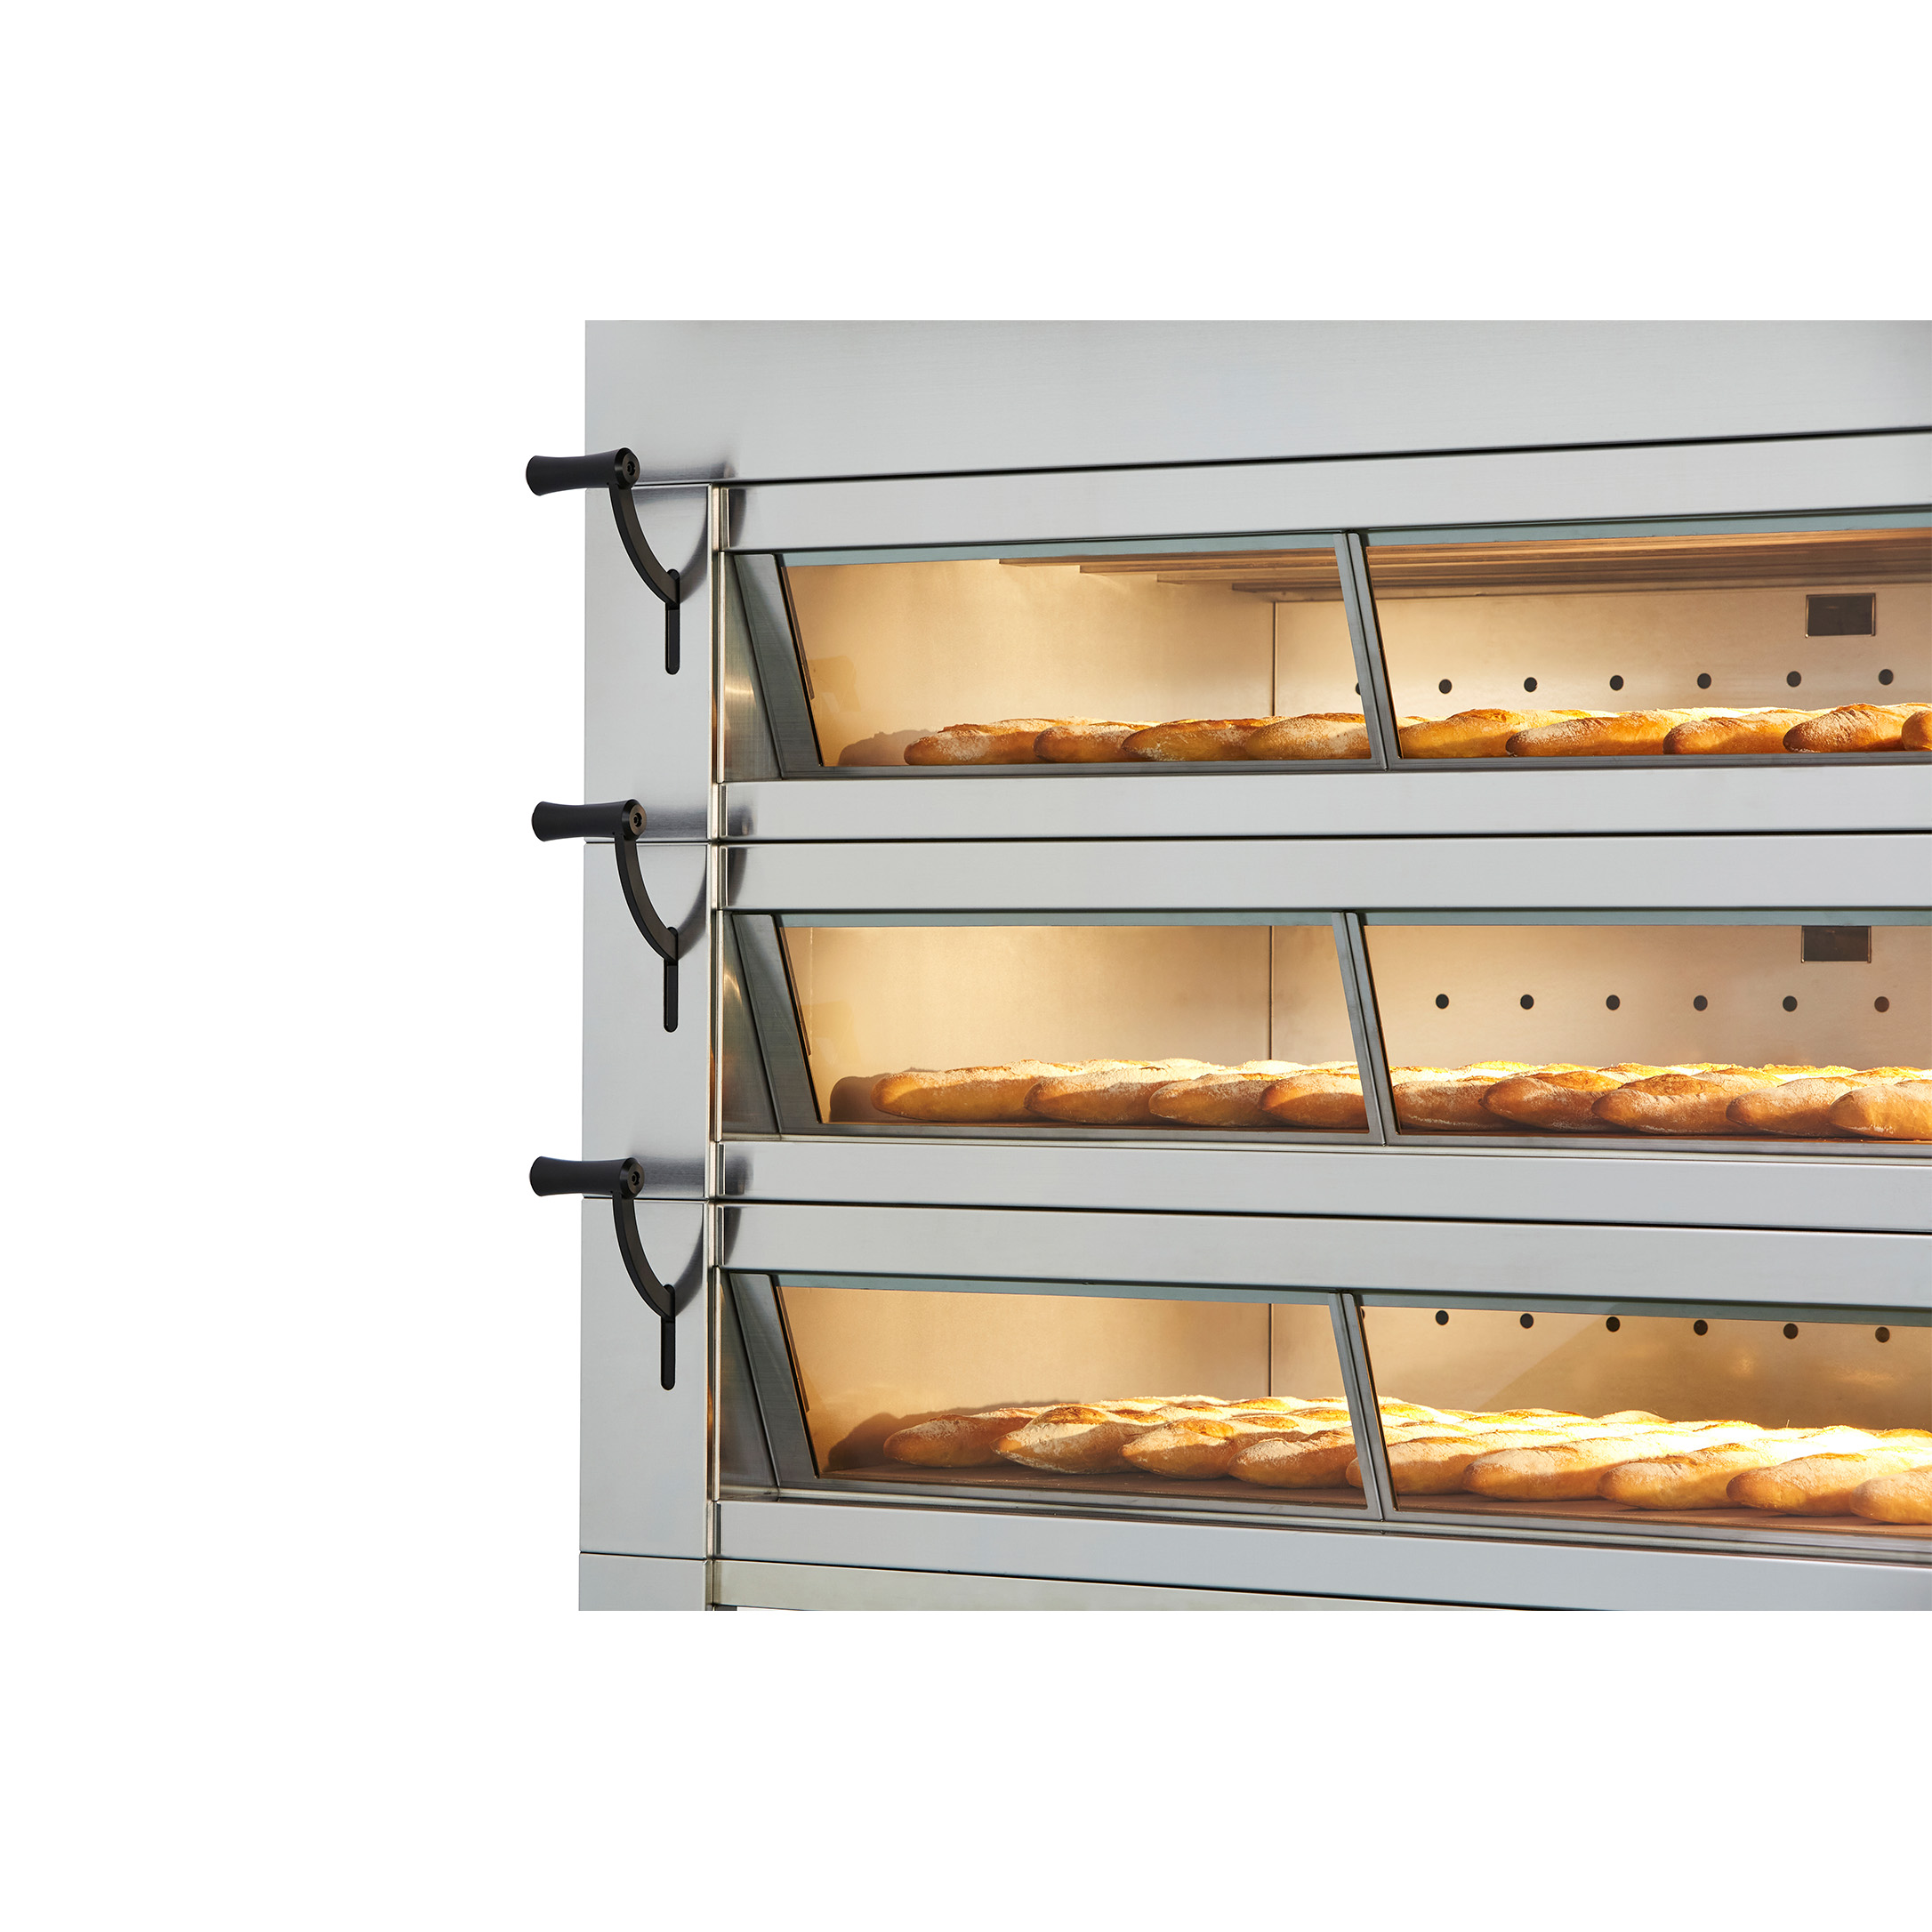 InnoBC Oven 4 trays 3 tiers detail carousel mini size images